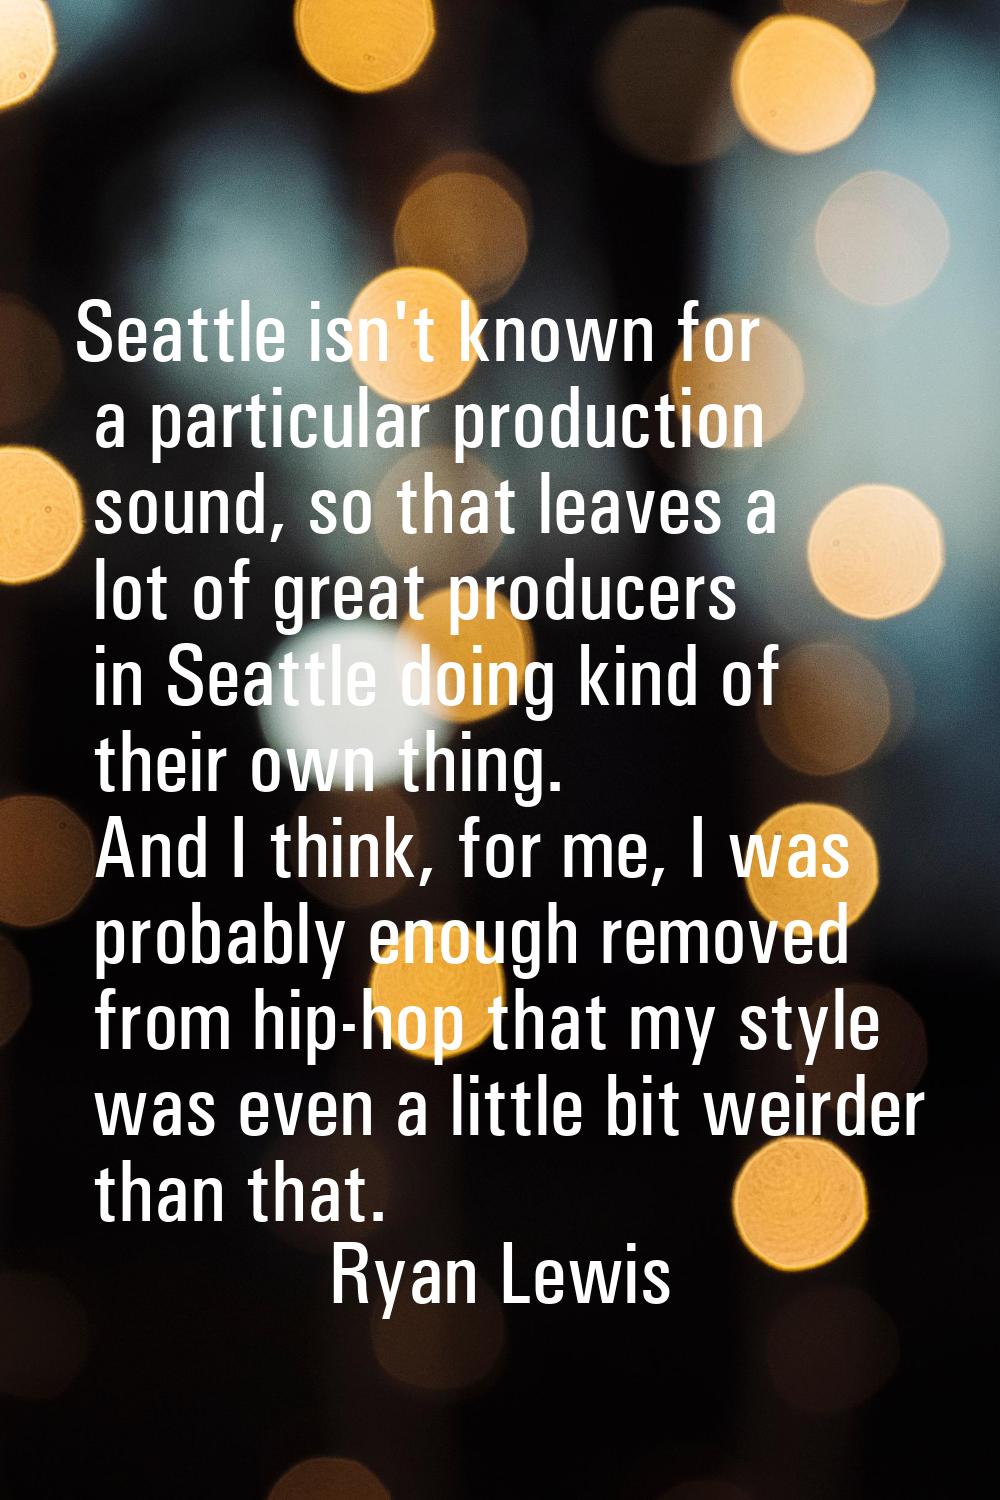 Seattle isn't known for a particular production sound, so that leaves a lot of great producers in S